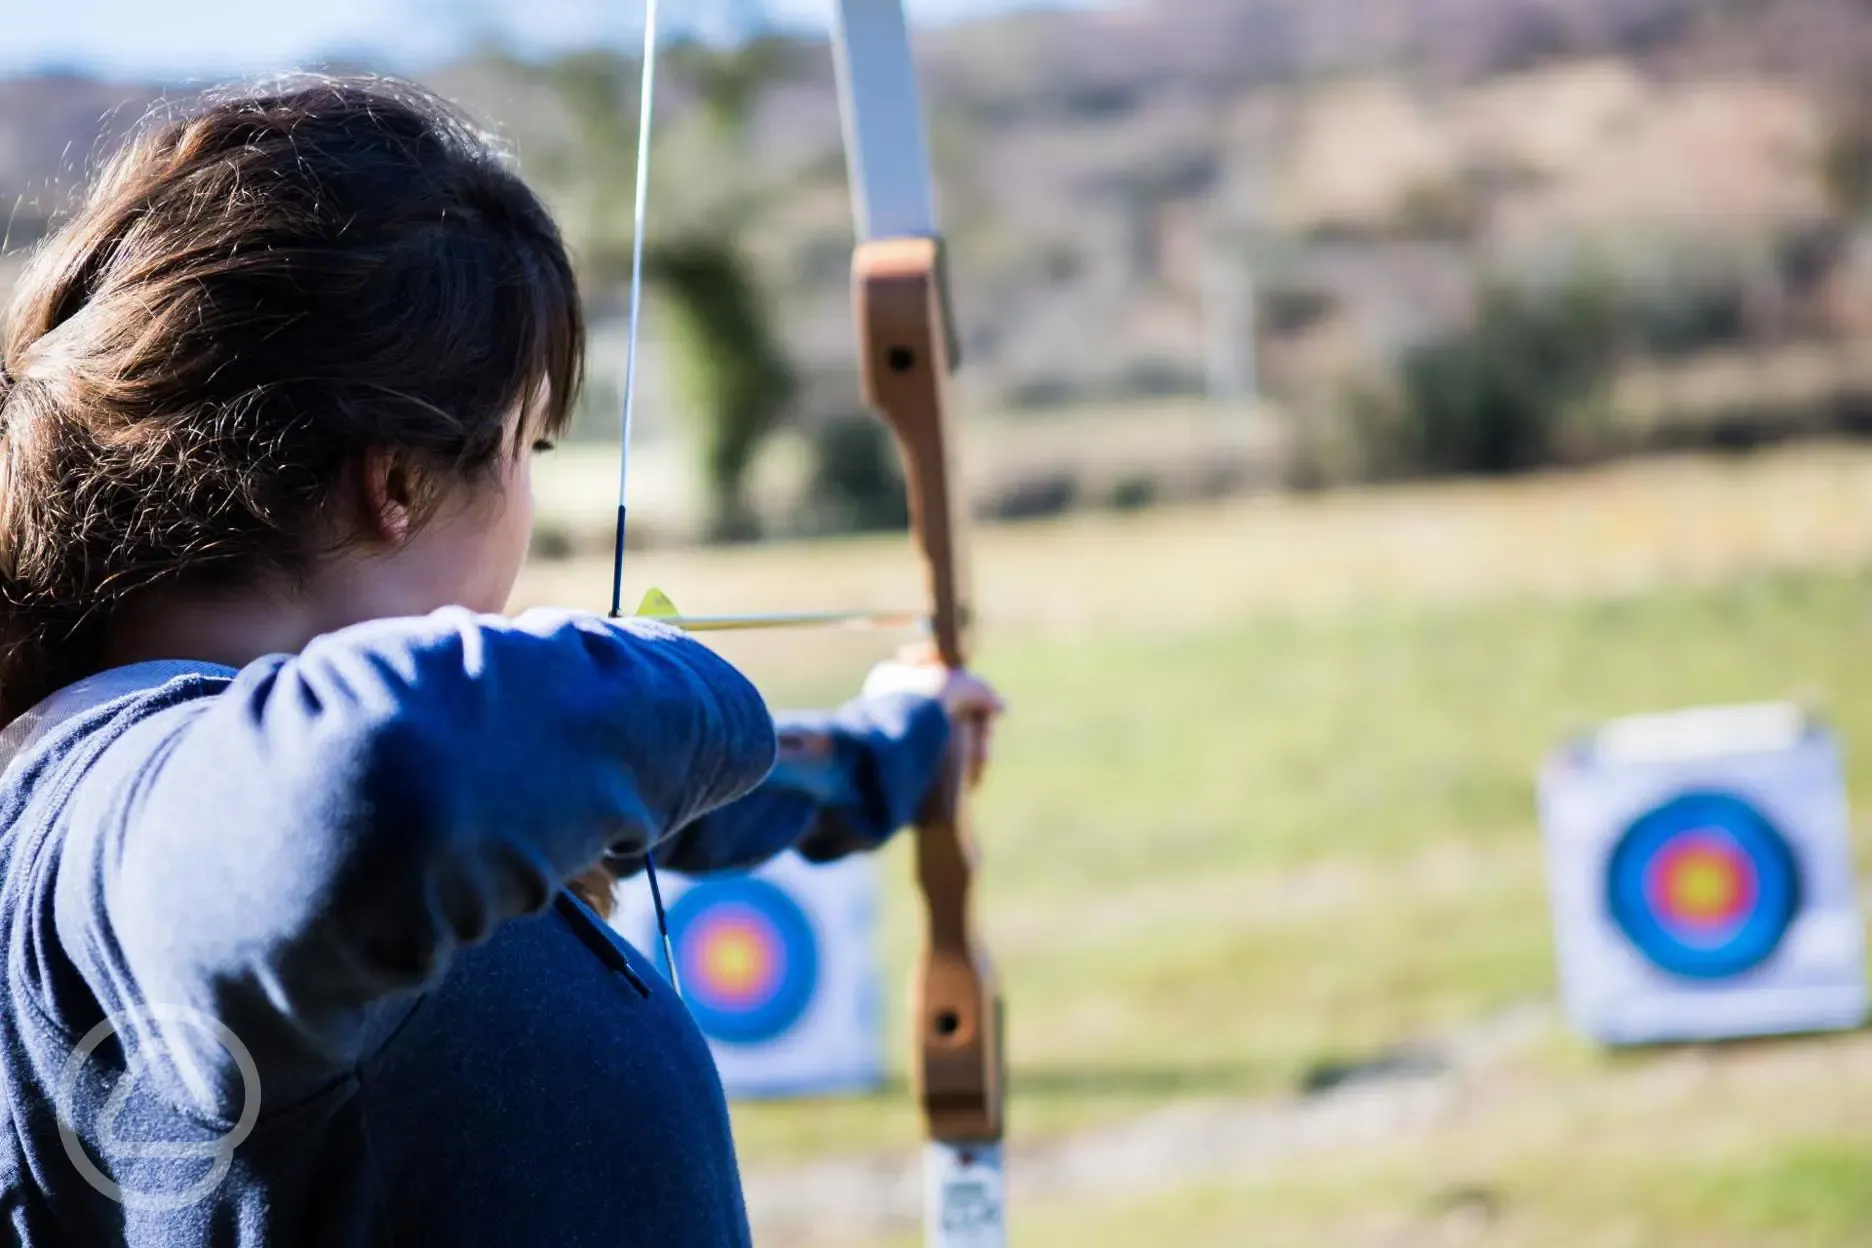 Have a go at archery on site.